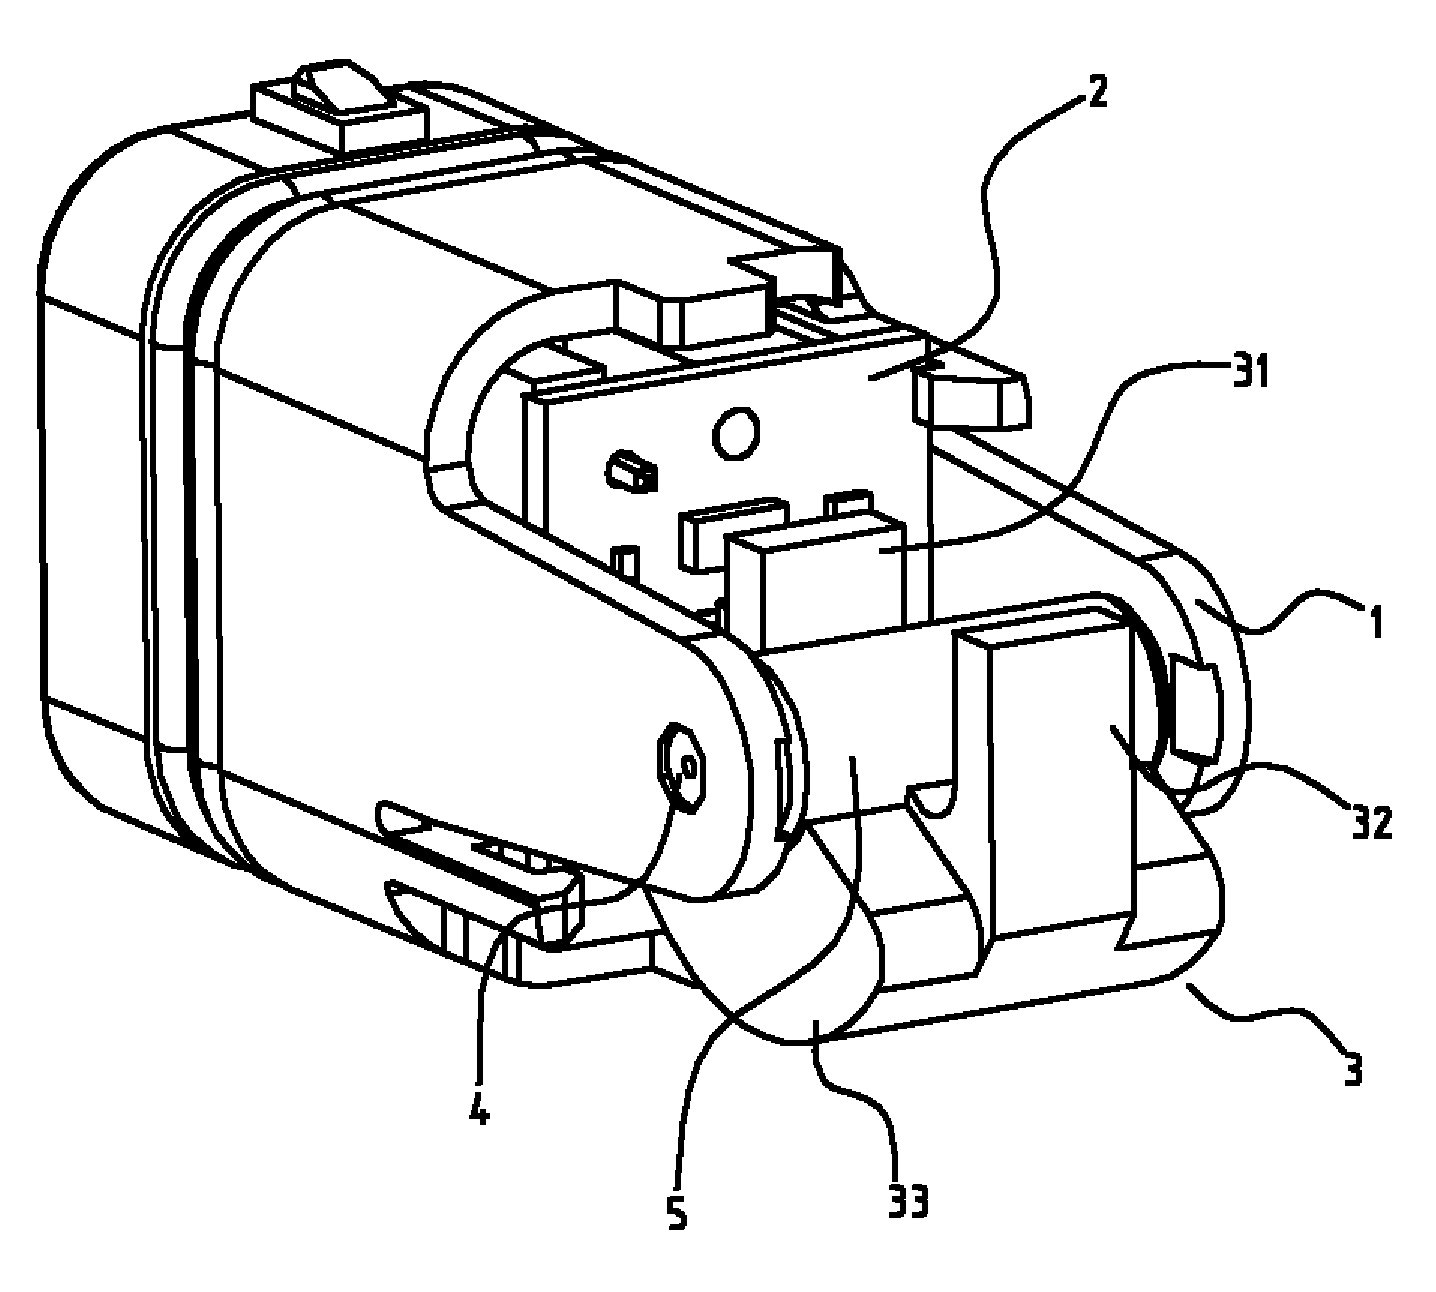 Dumping inductive switch of motorcycle